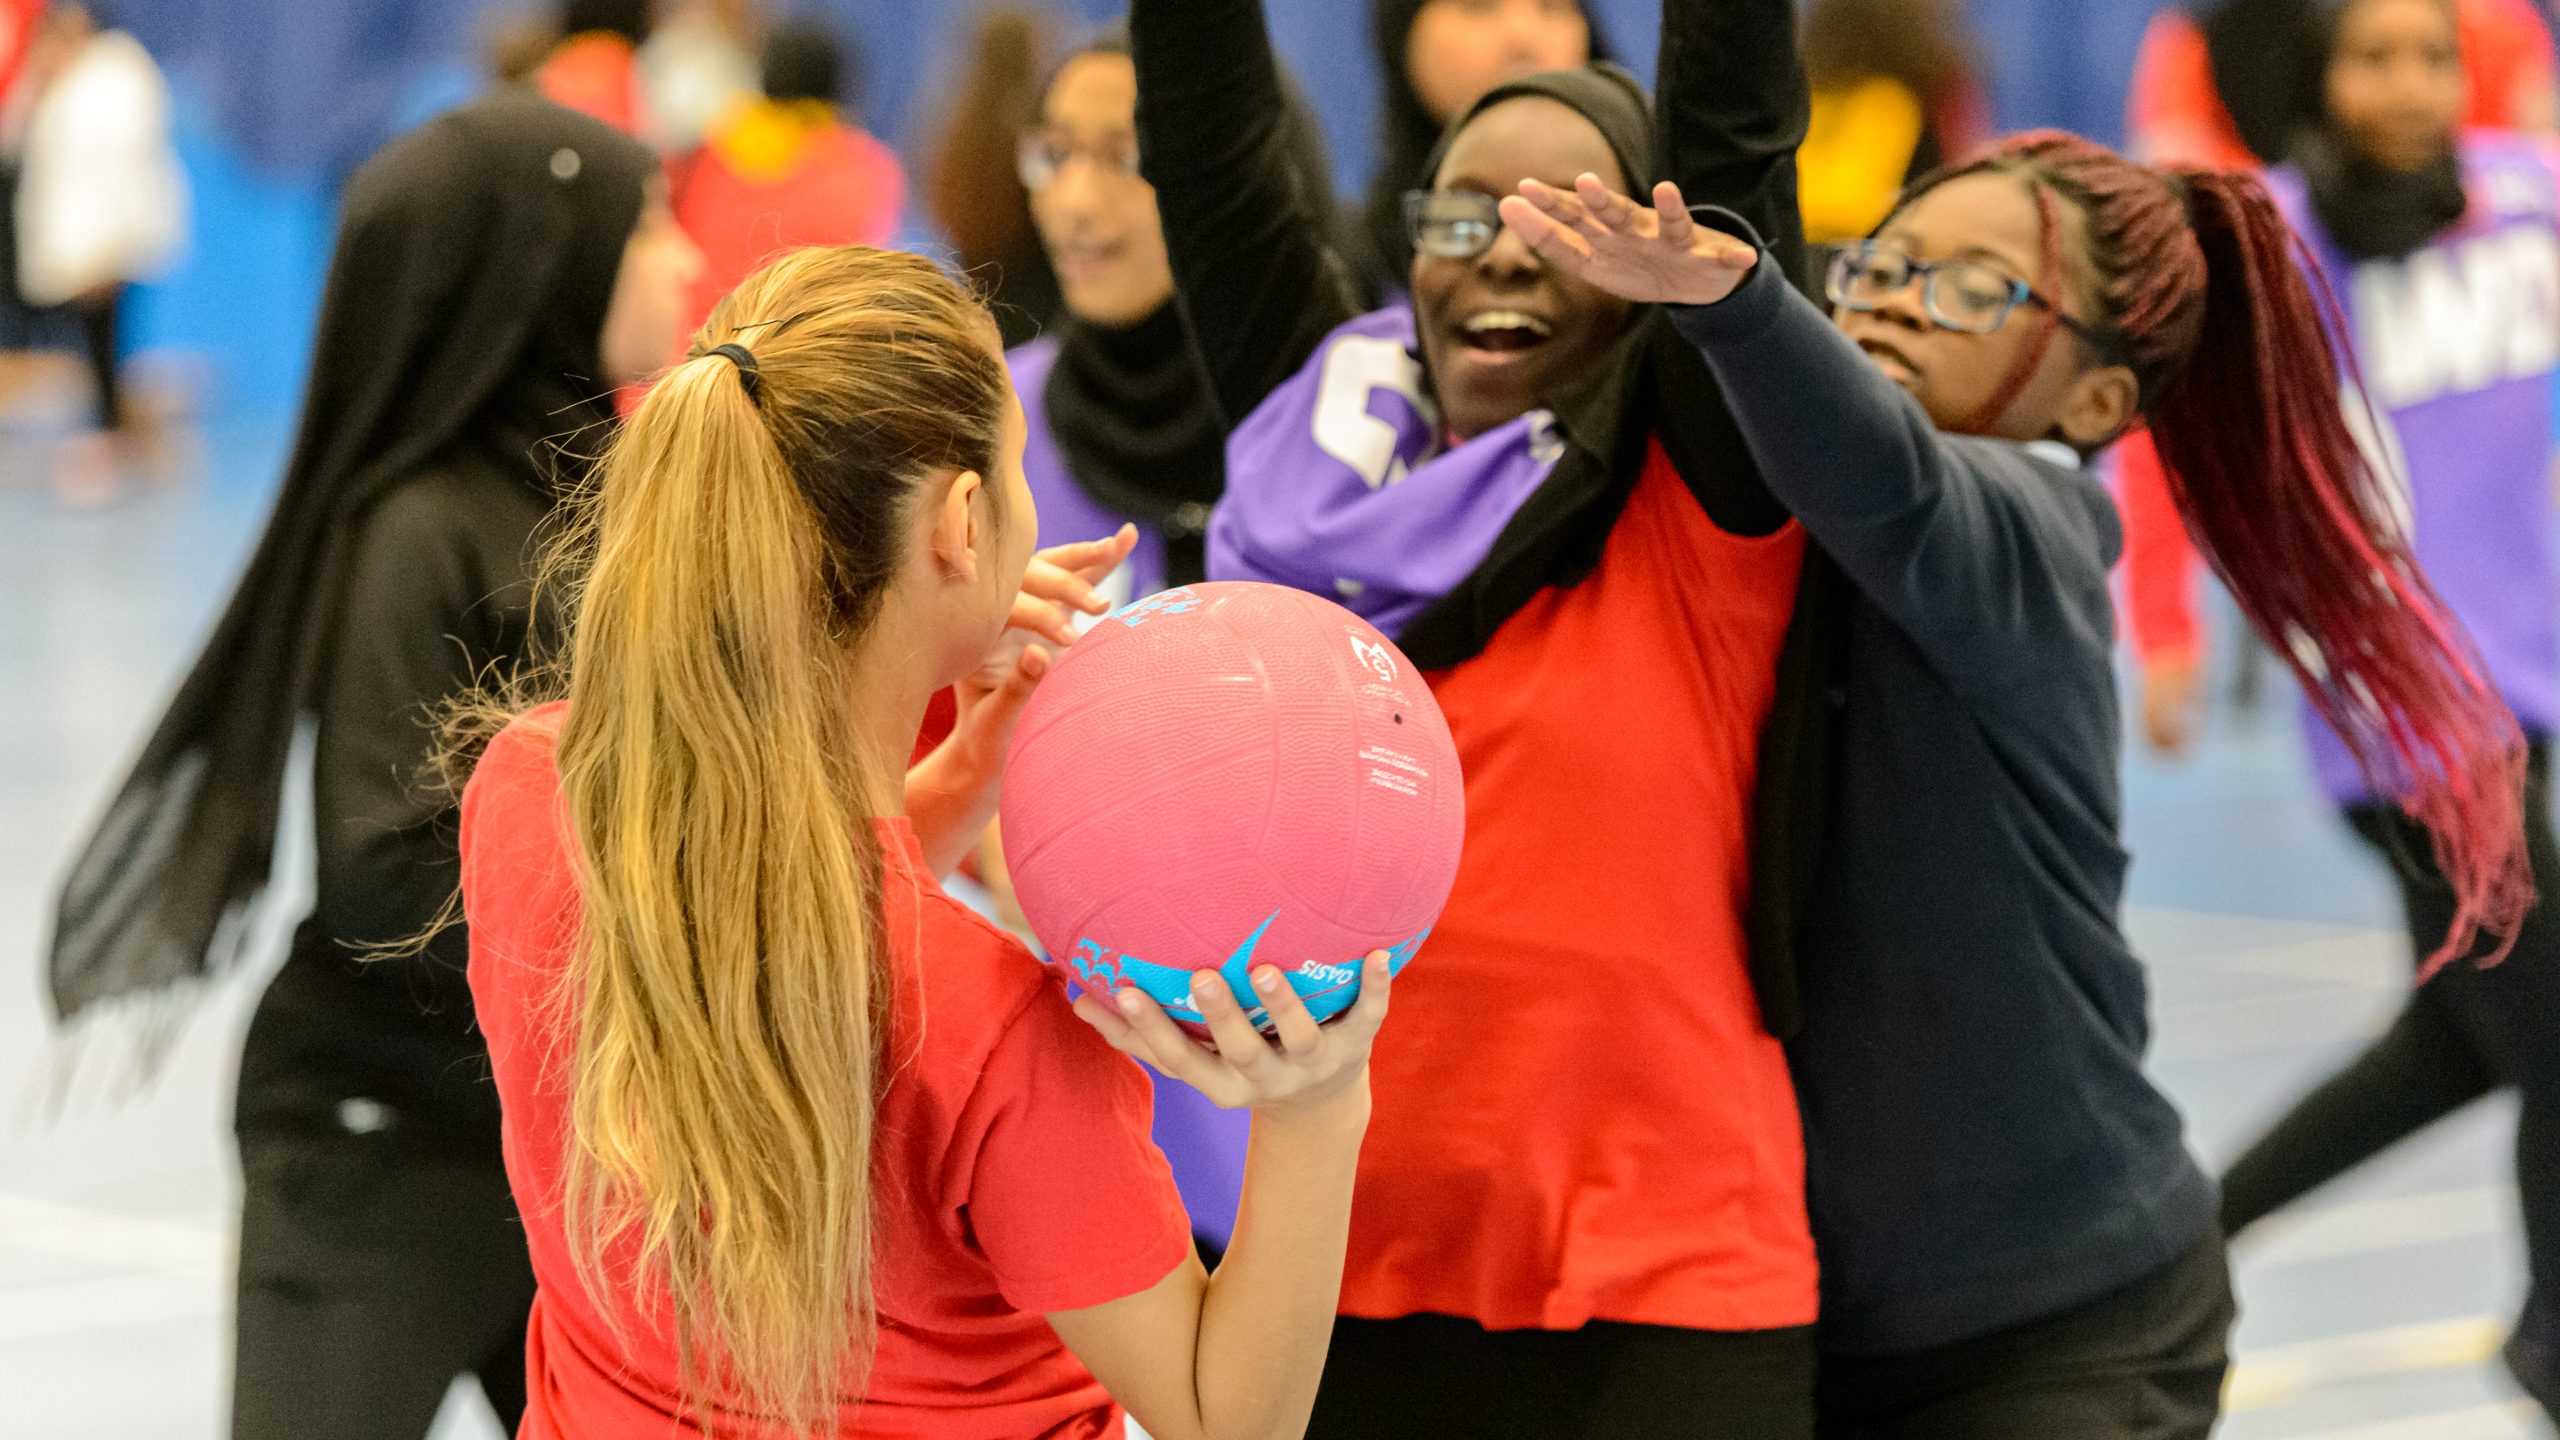 A group of teenagers from different backgrounds playing school netball